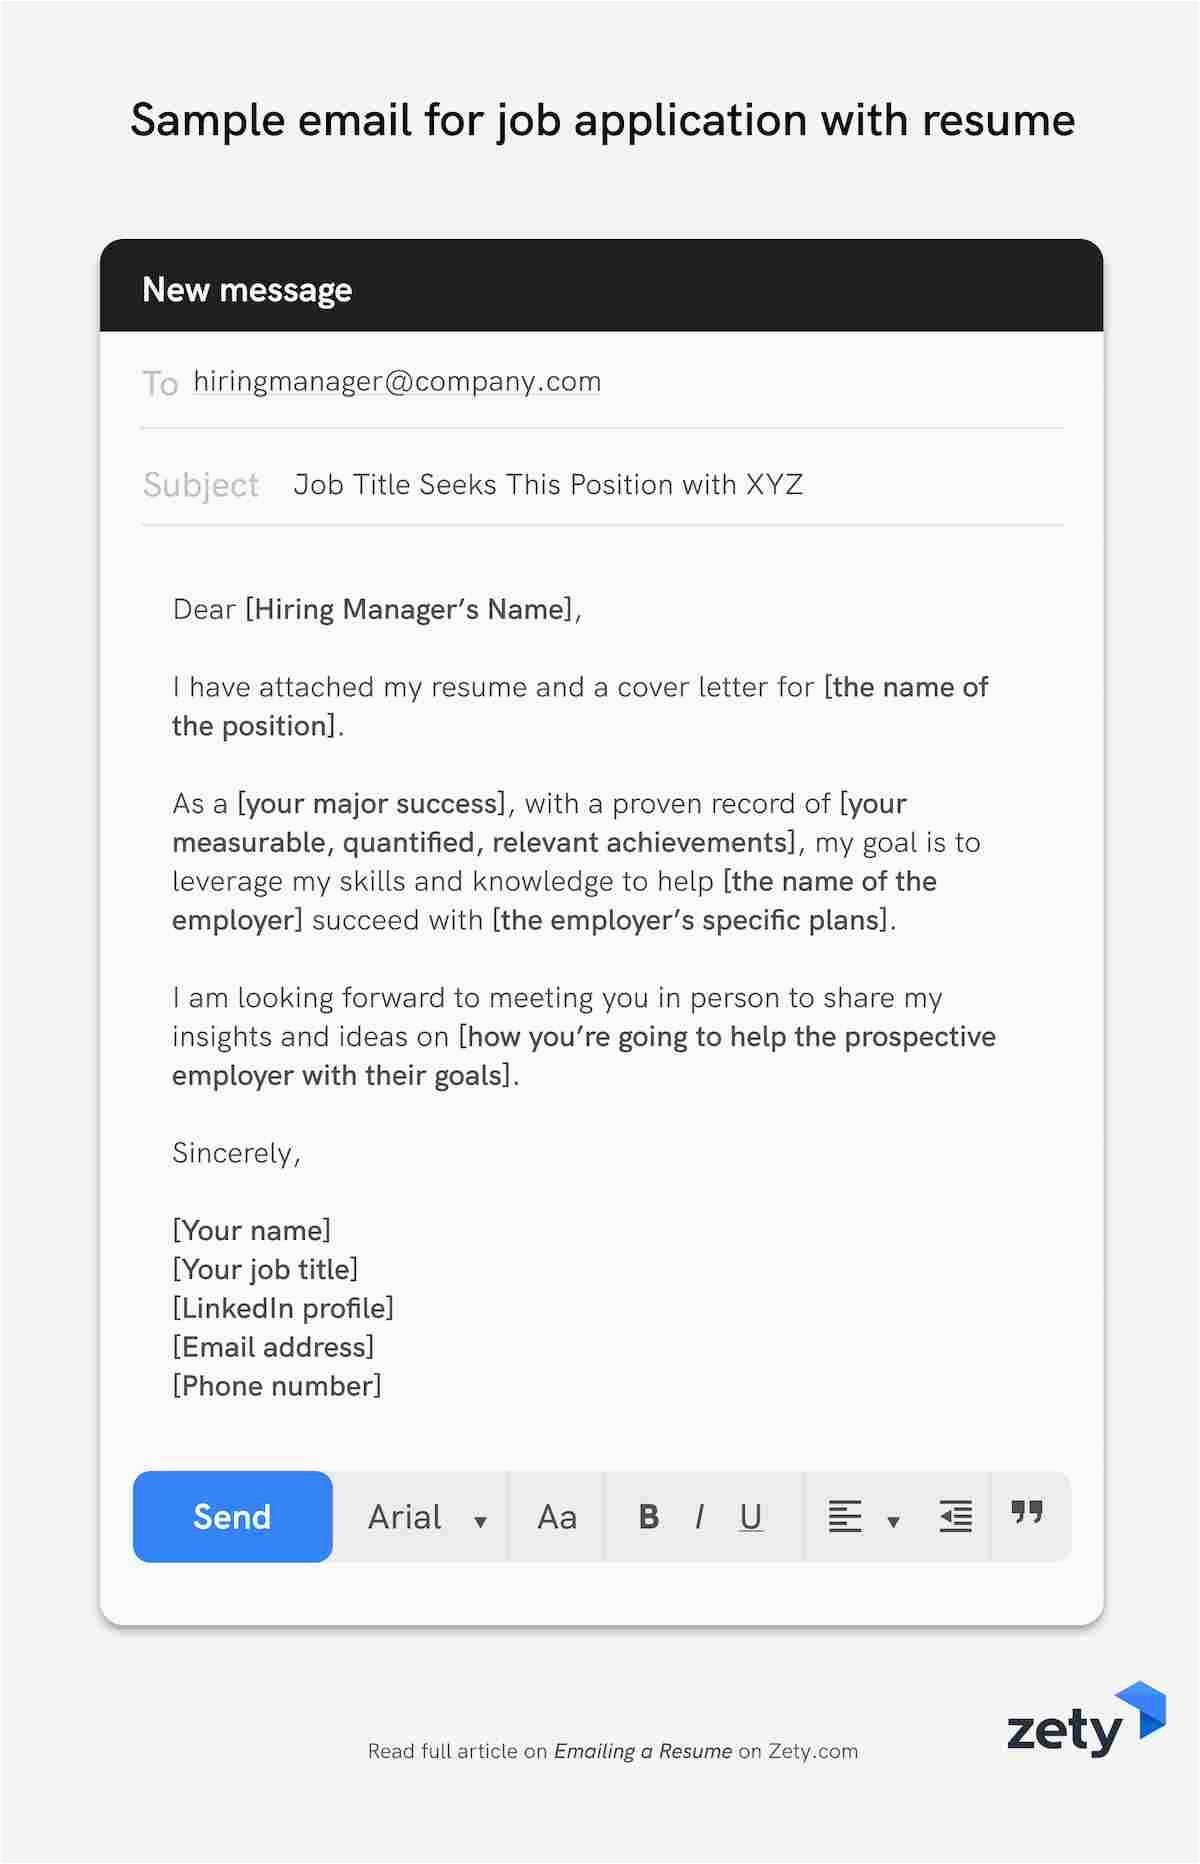 Sample Email Letter with Resume attached Email with Cover Letter and Resume attached Sample Database Letter